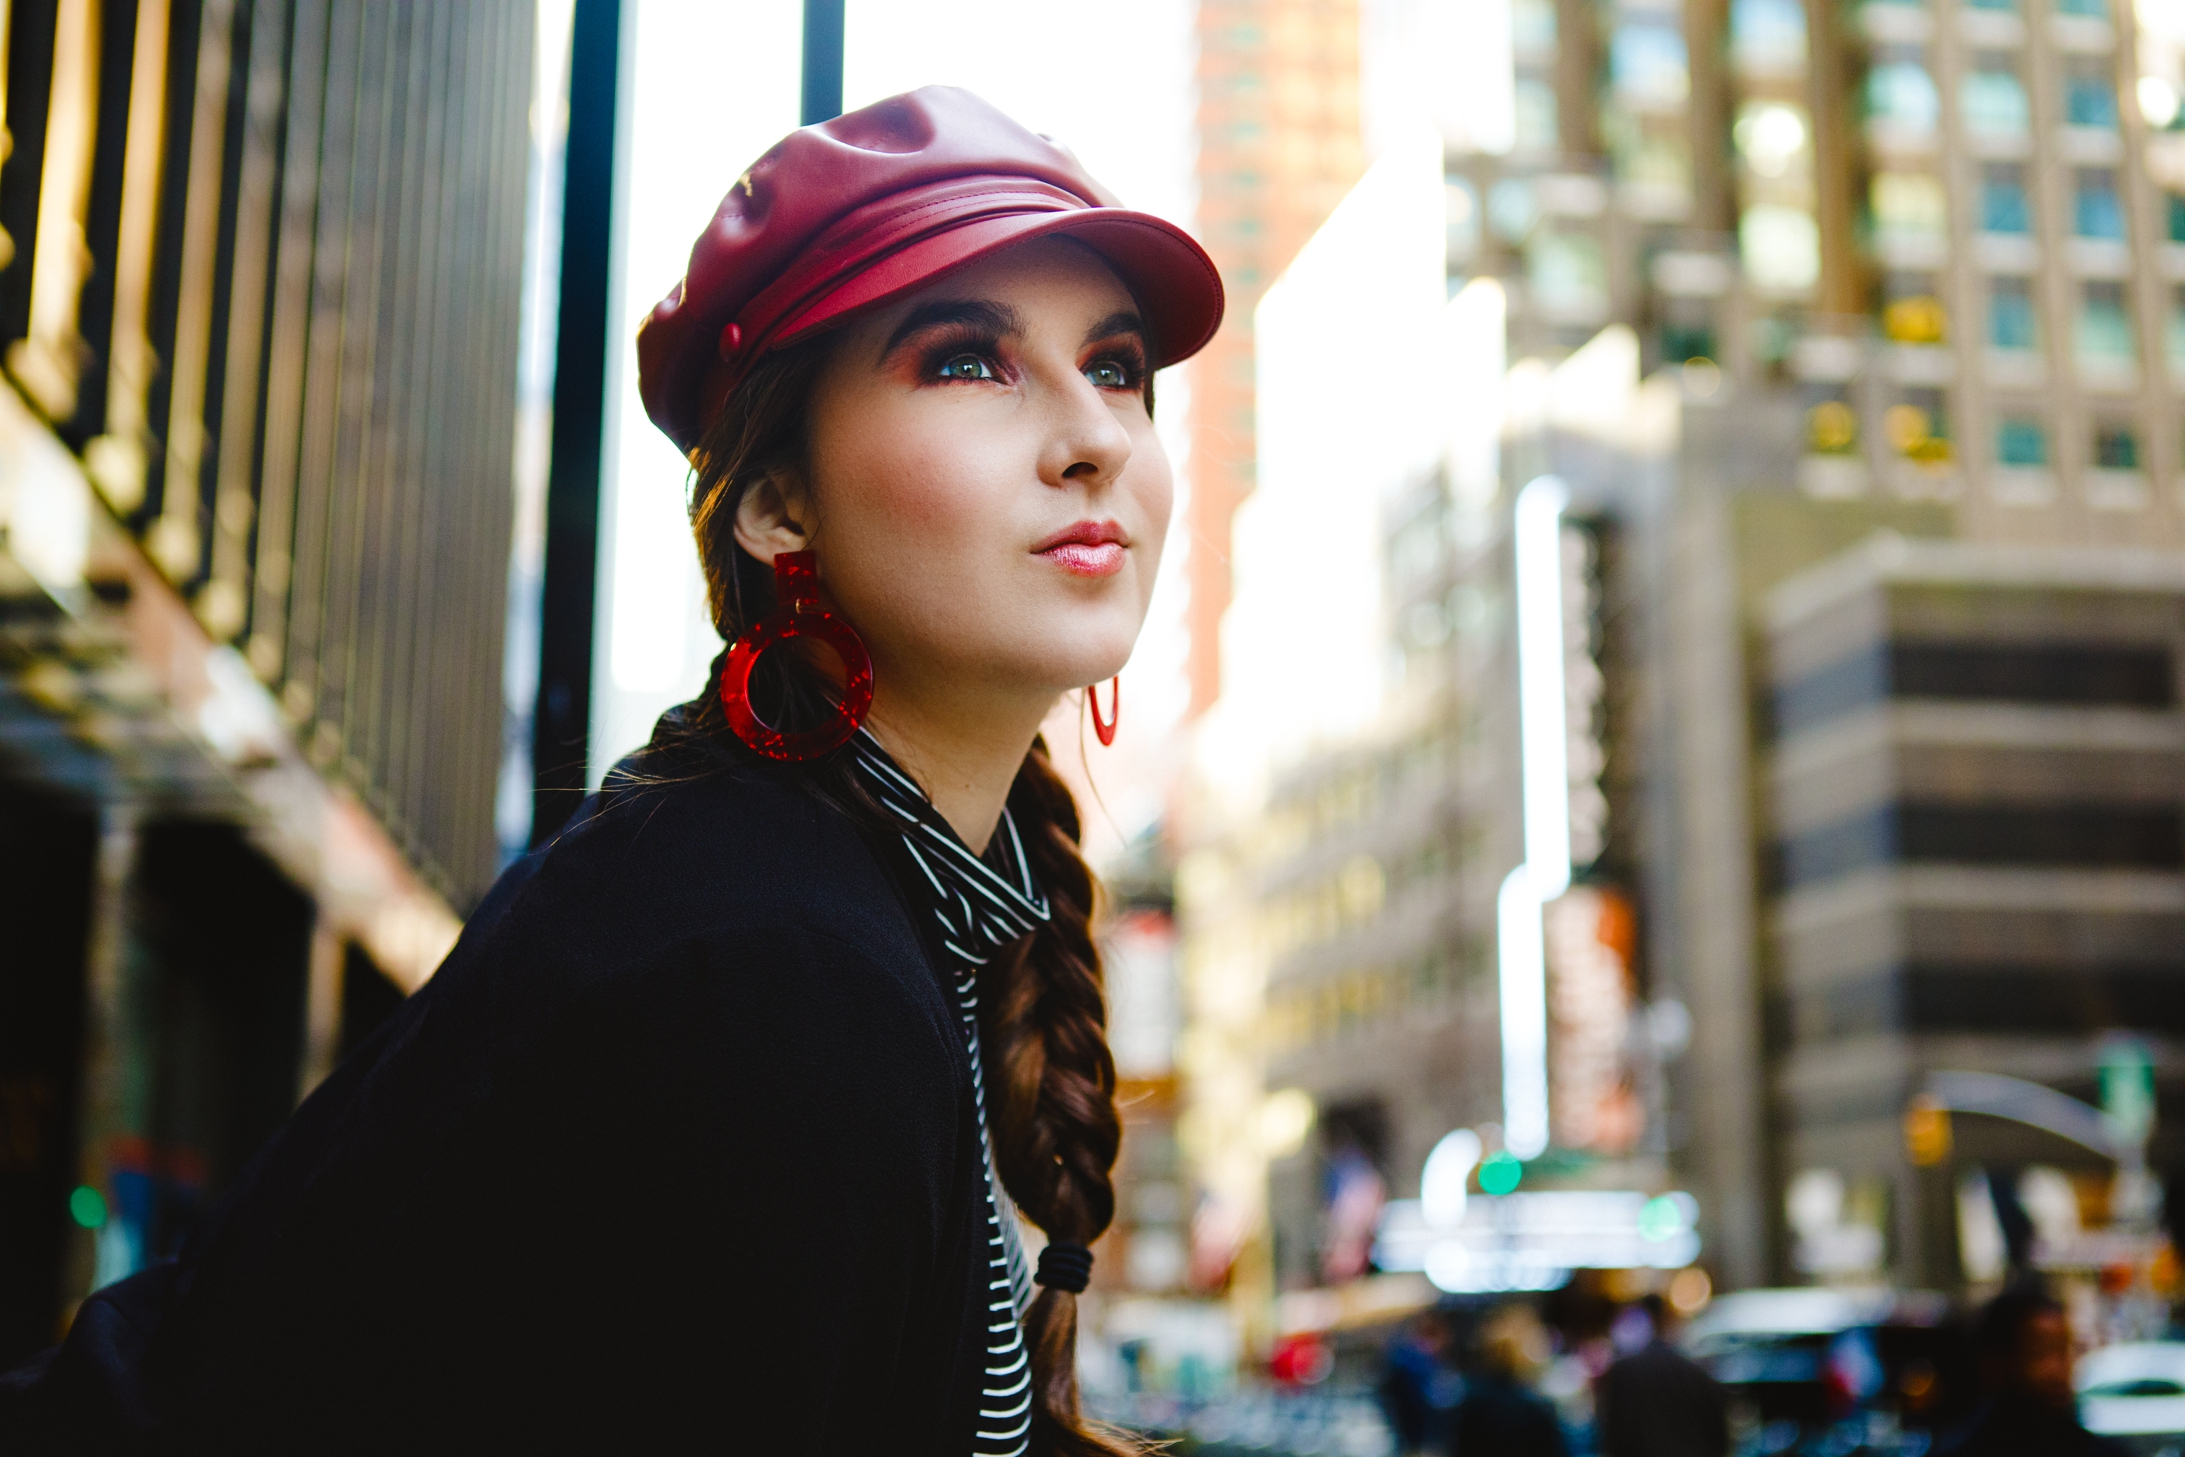 Model in New York City wearing red cap and large red earrings